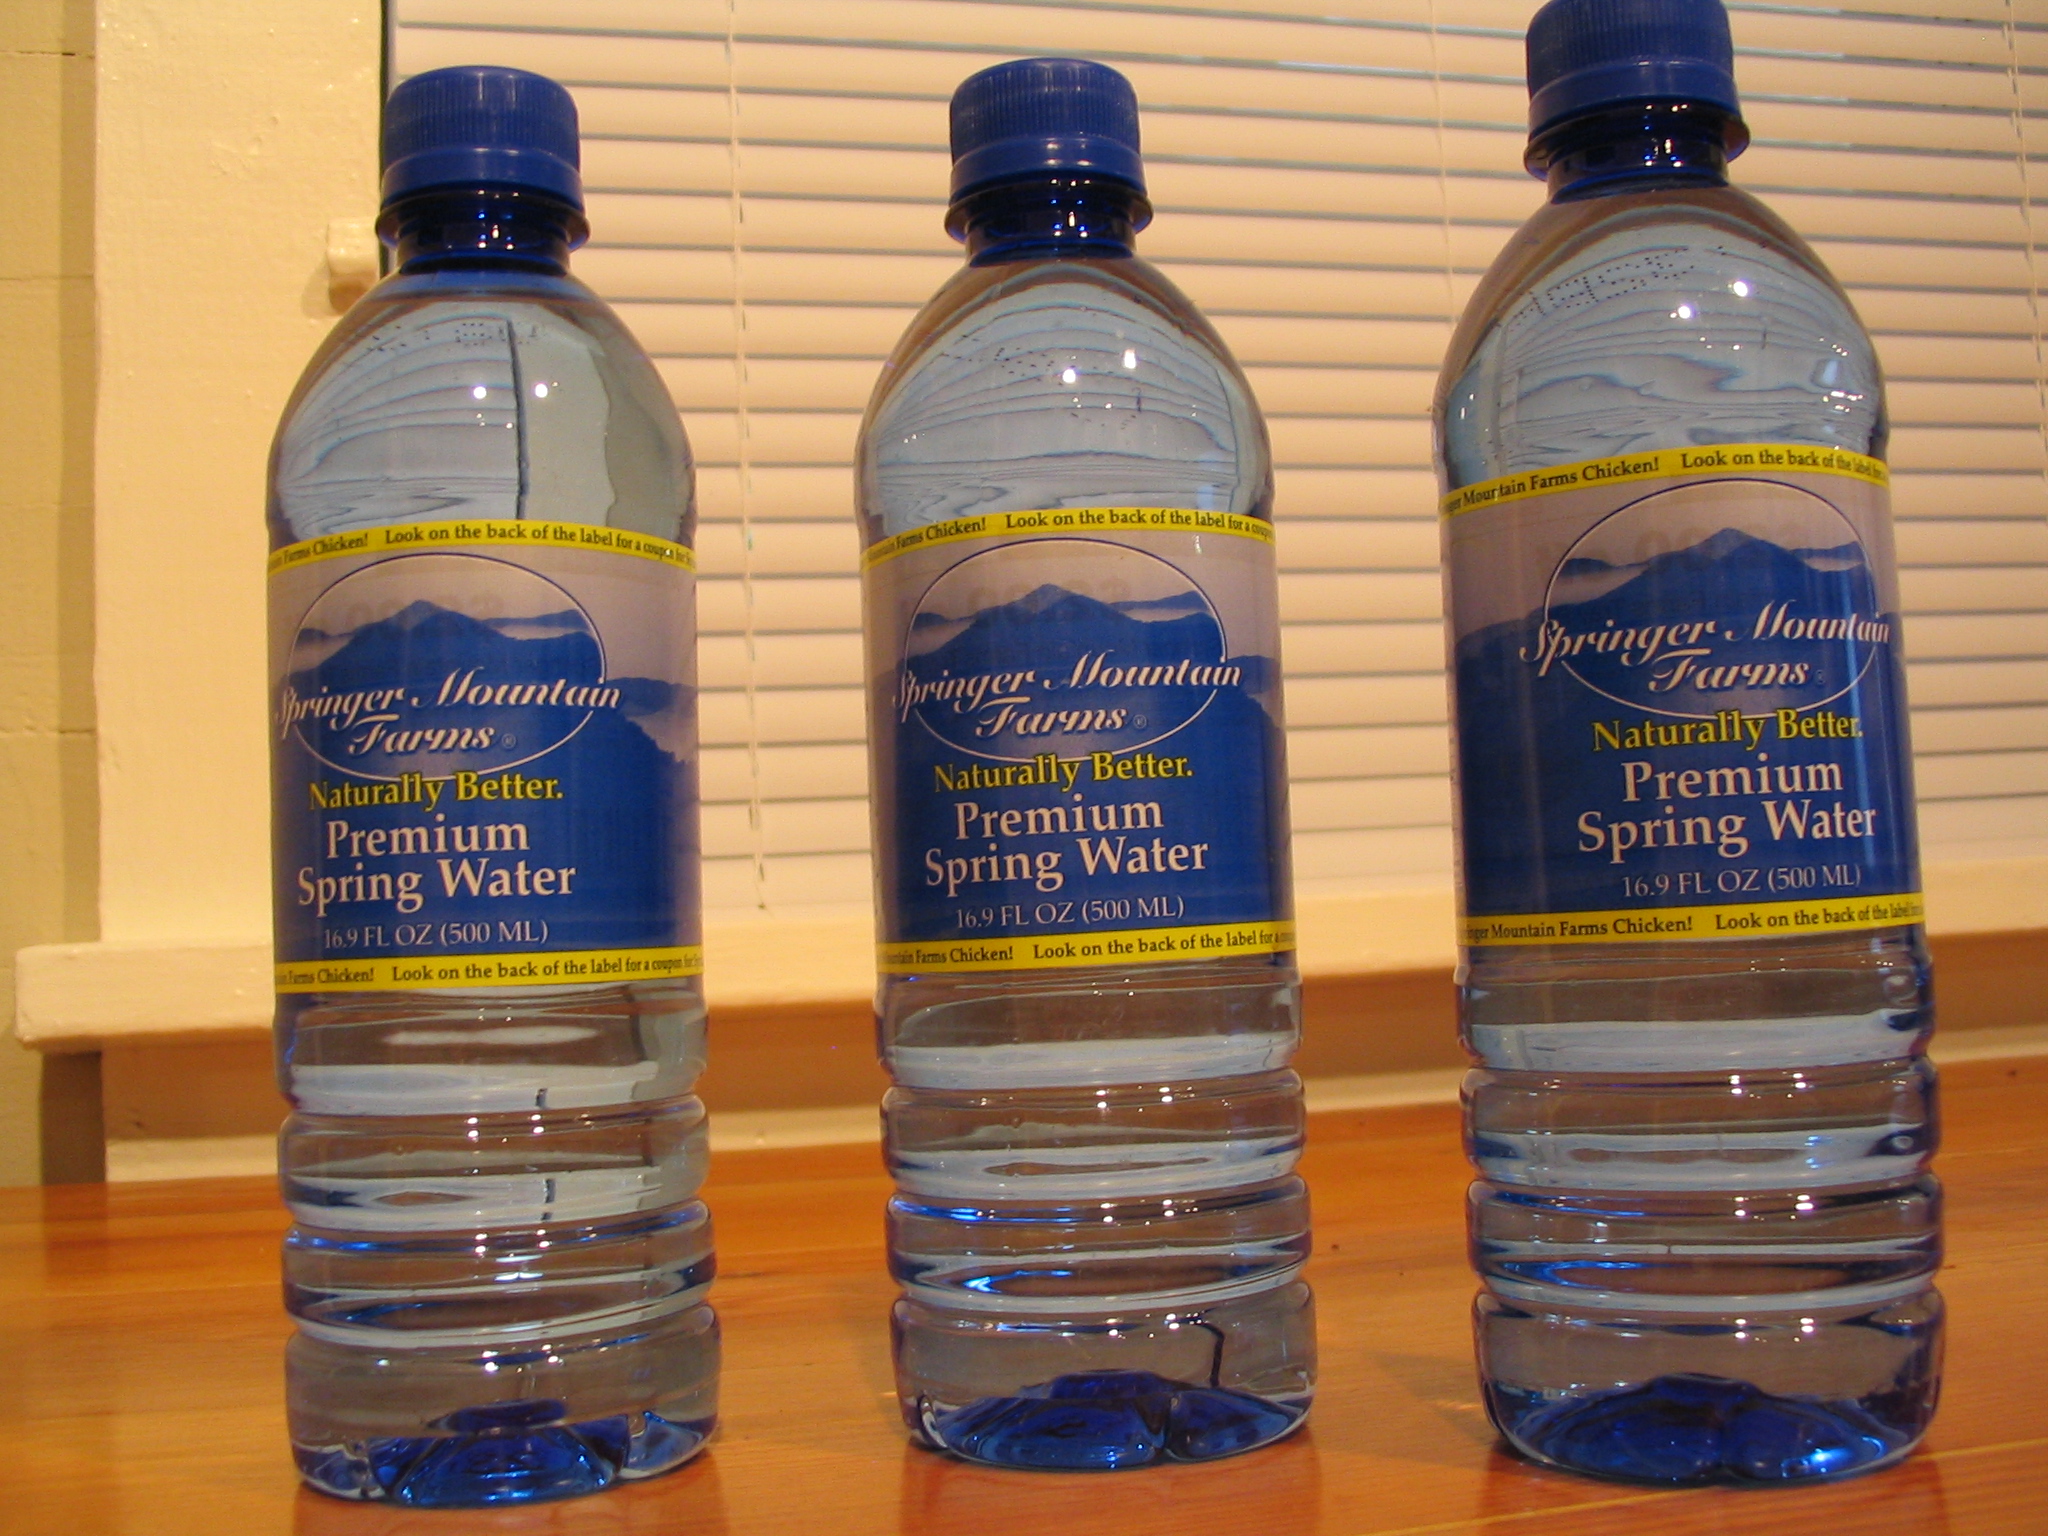 Premium Spring Water - Compliments of Springer Mountain Farms